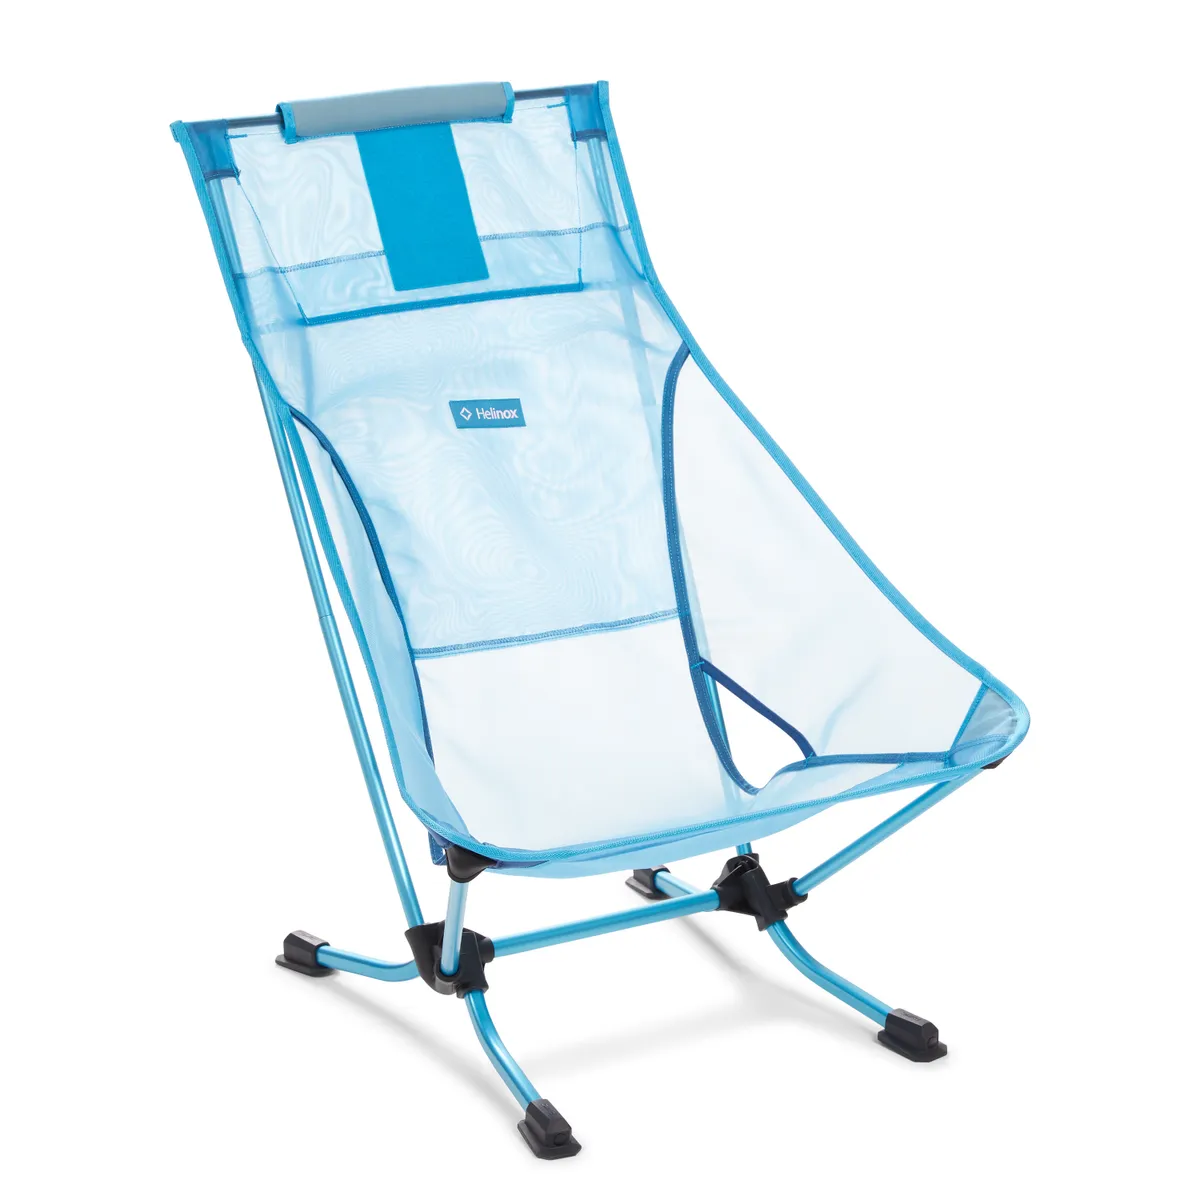 Collapsible blue chair for the beach